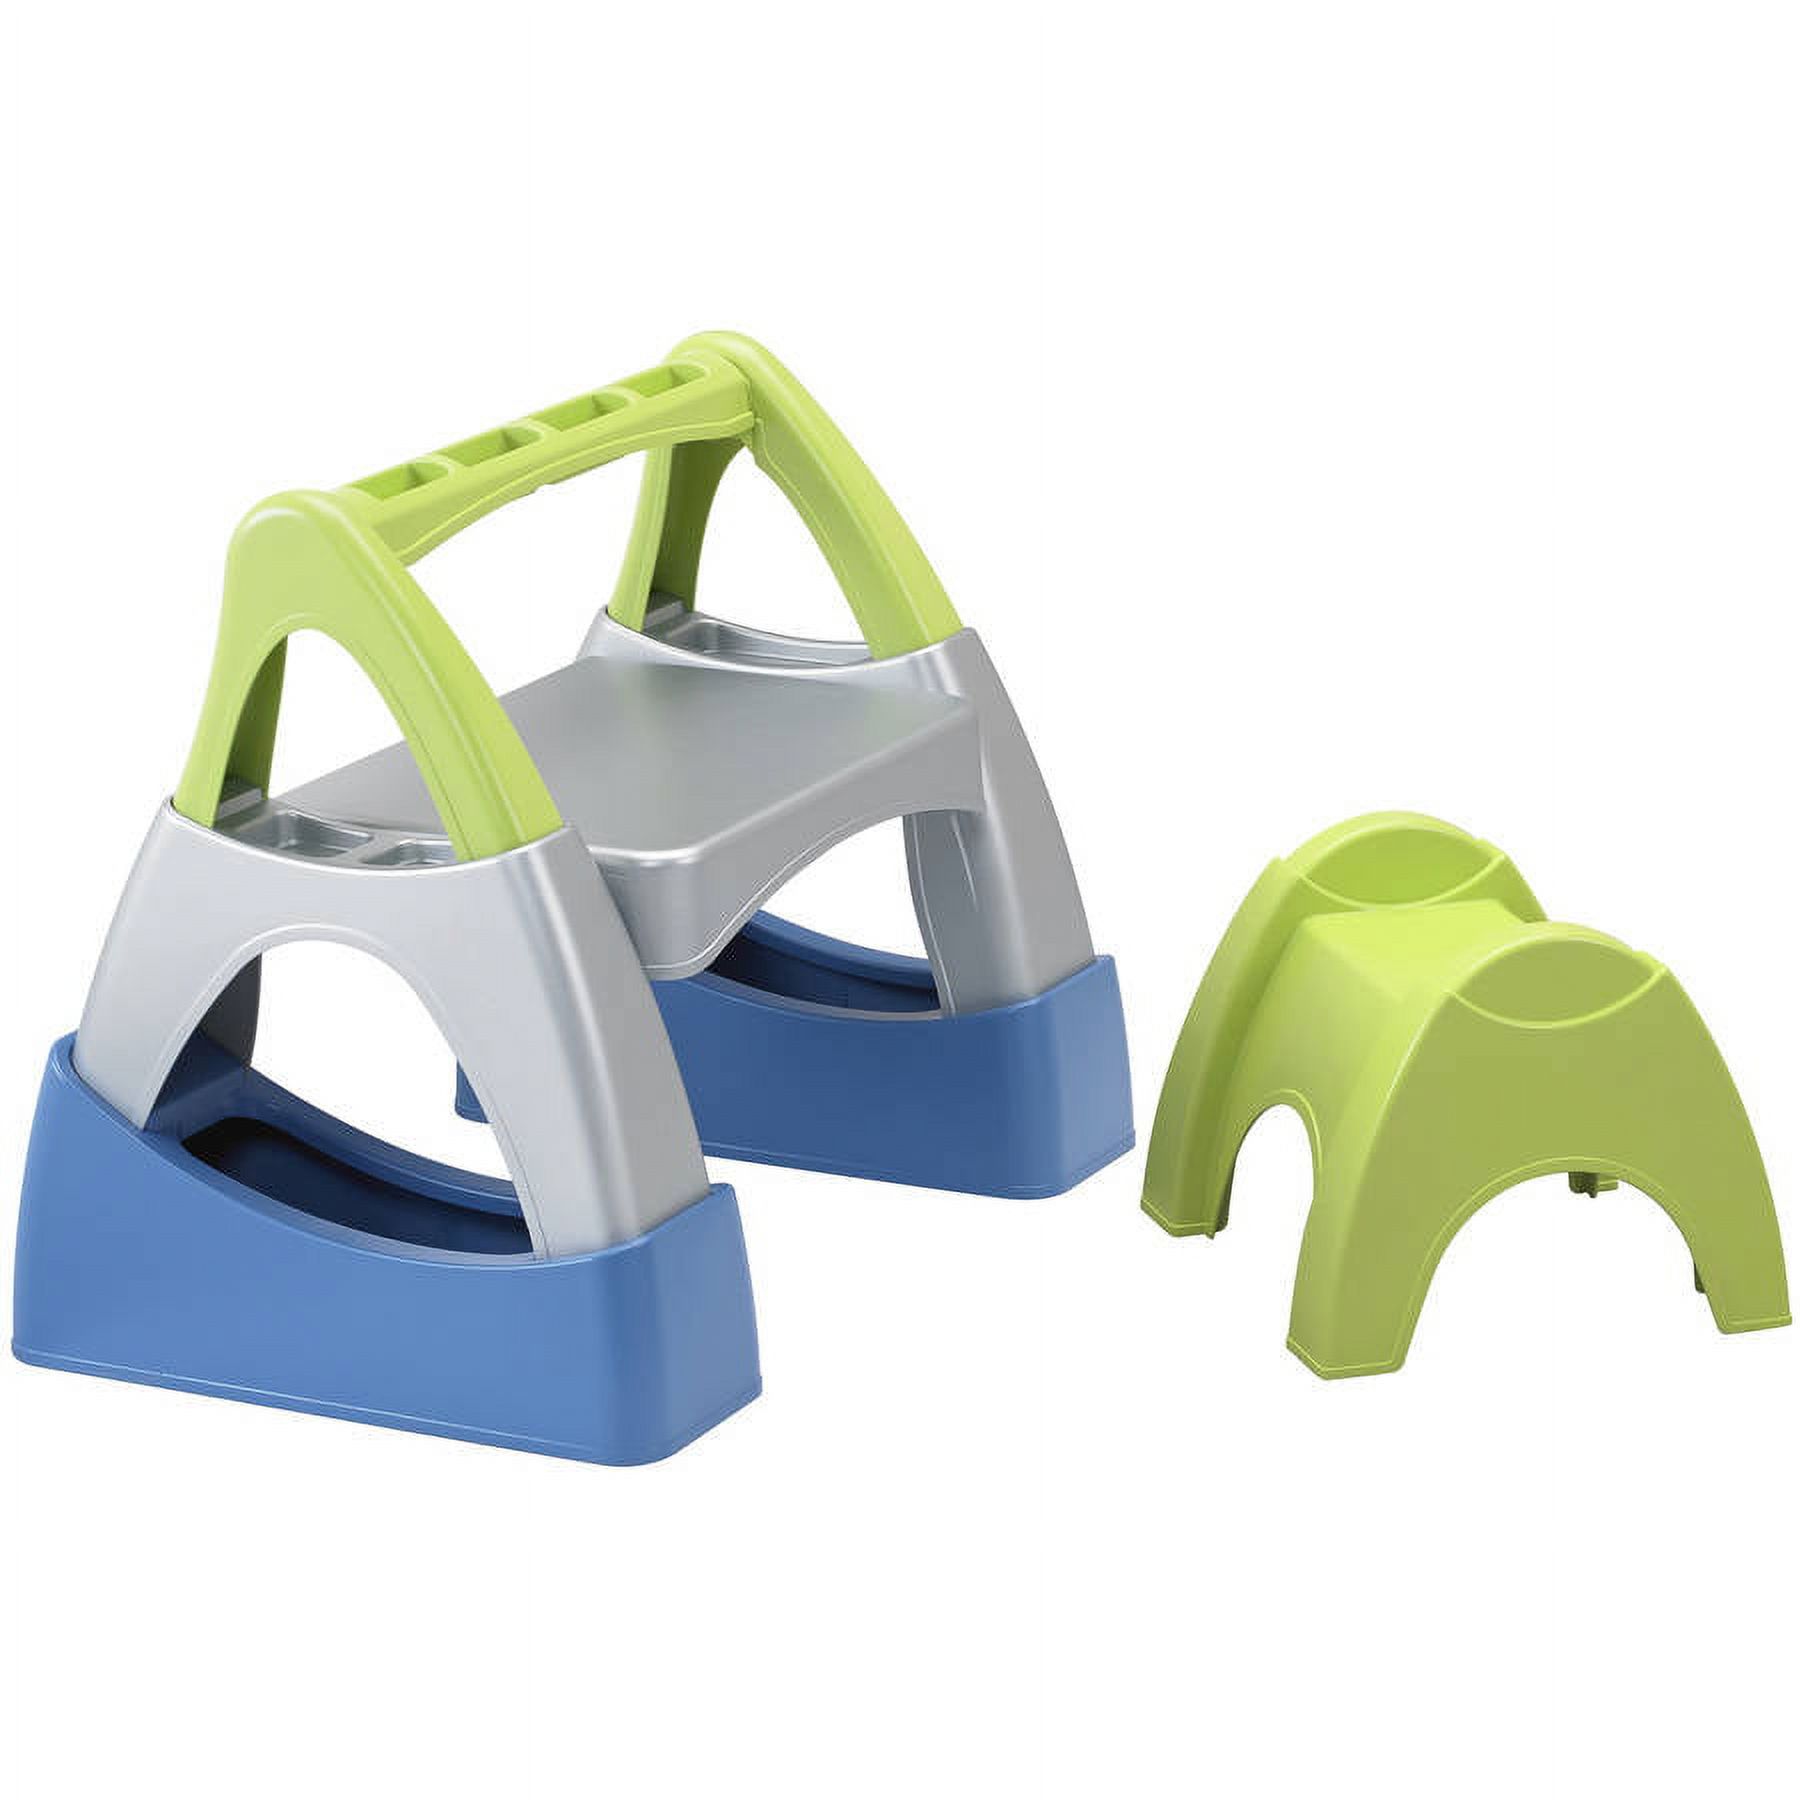 American Plastic Toys Study 'N' Play Desk & Chair Set - image 1 of 5